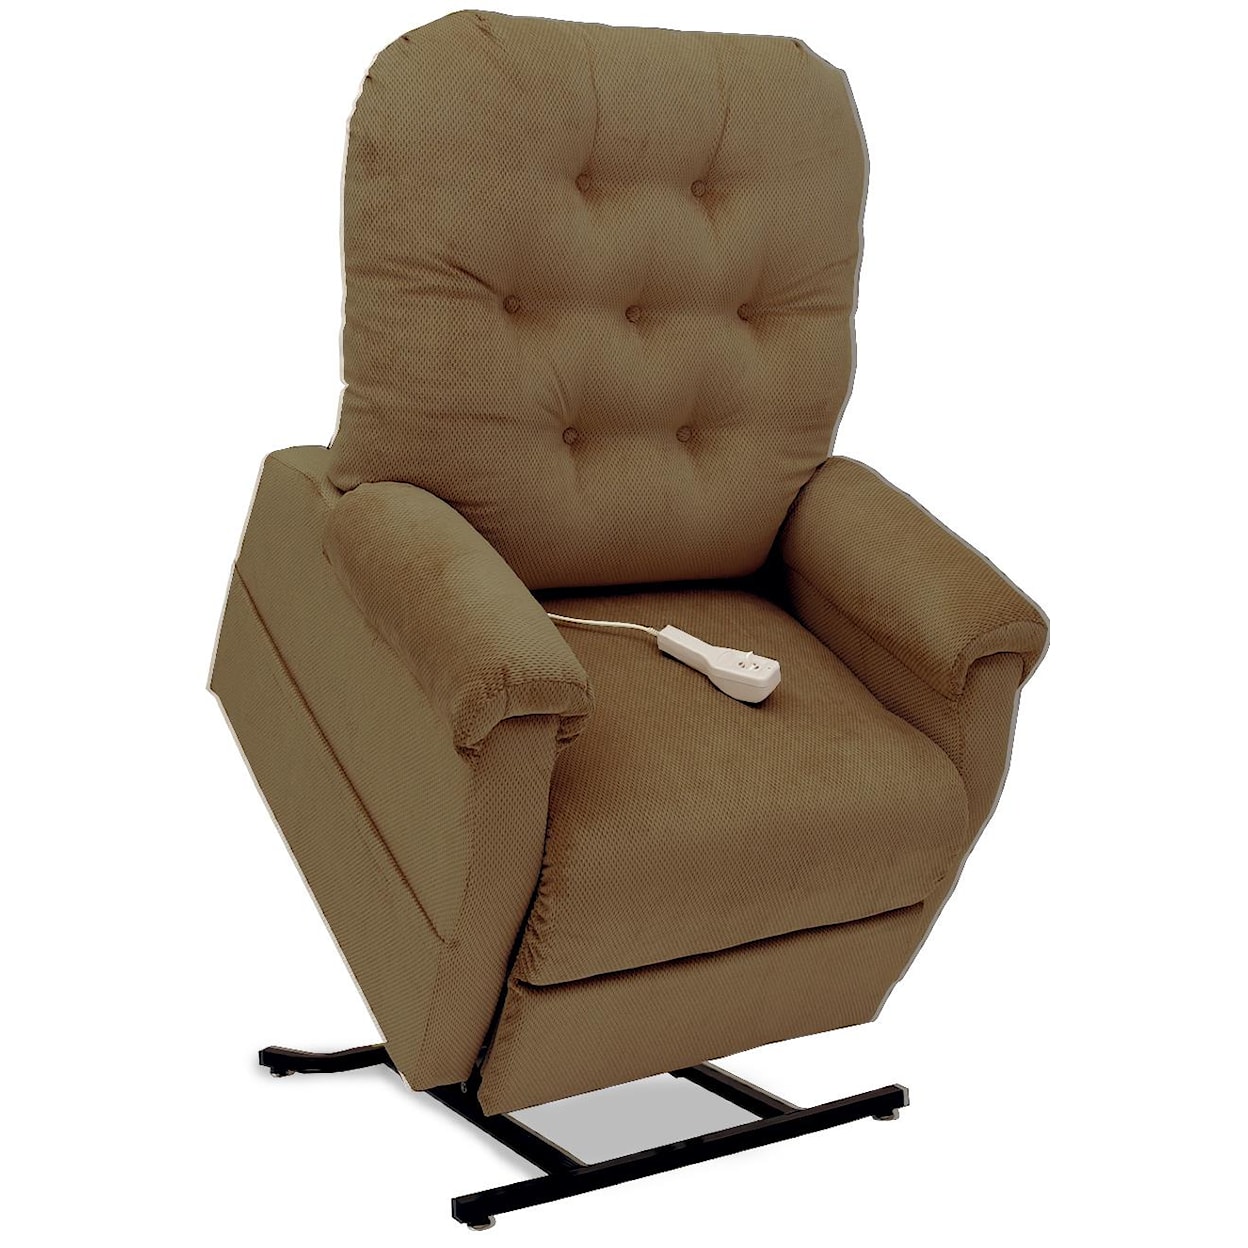 Windermere Motion Lift Chairs 3-Position Reclining Chaise Lounger